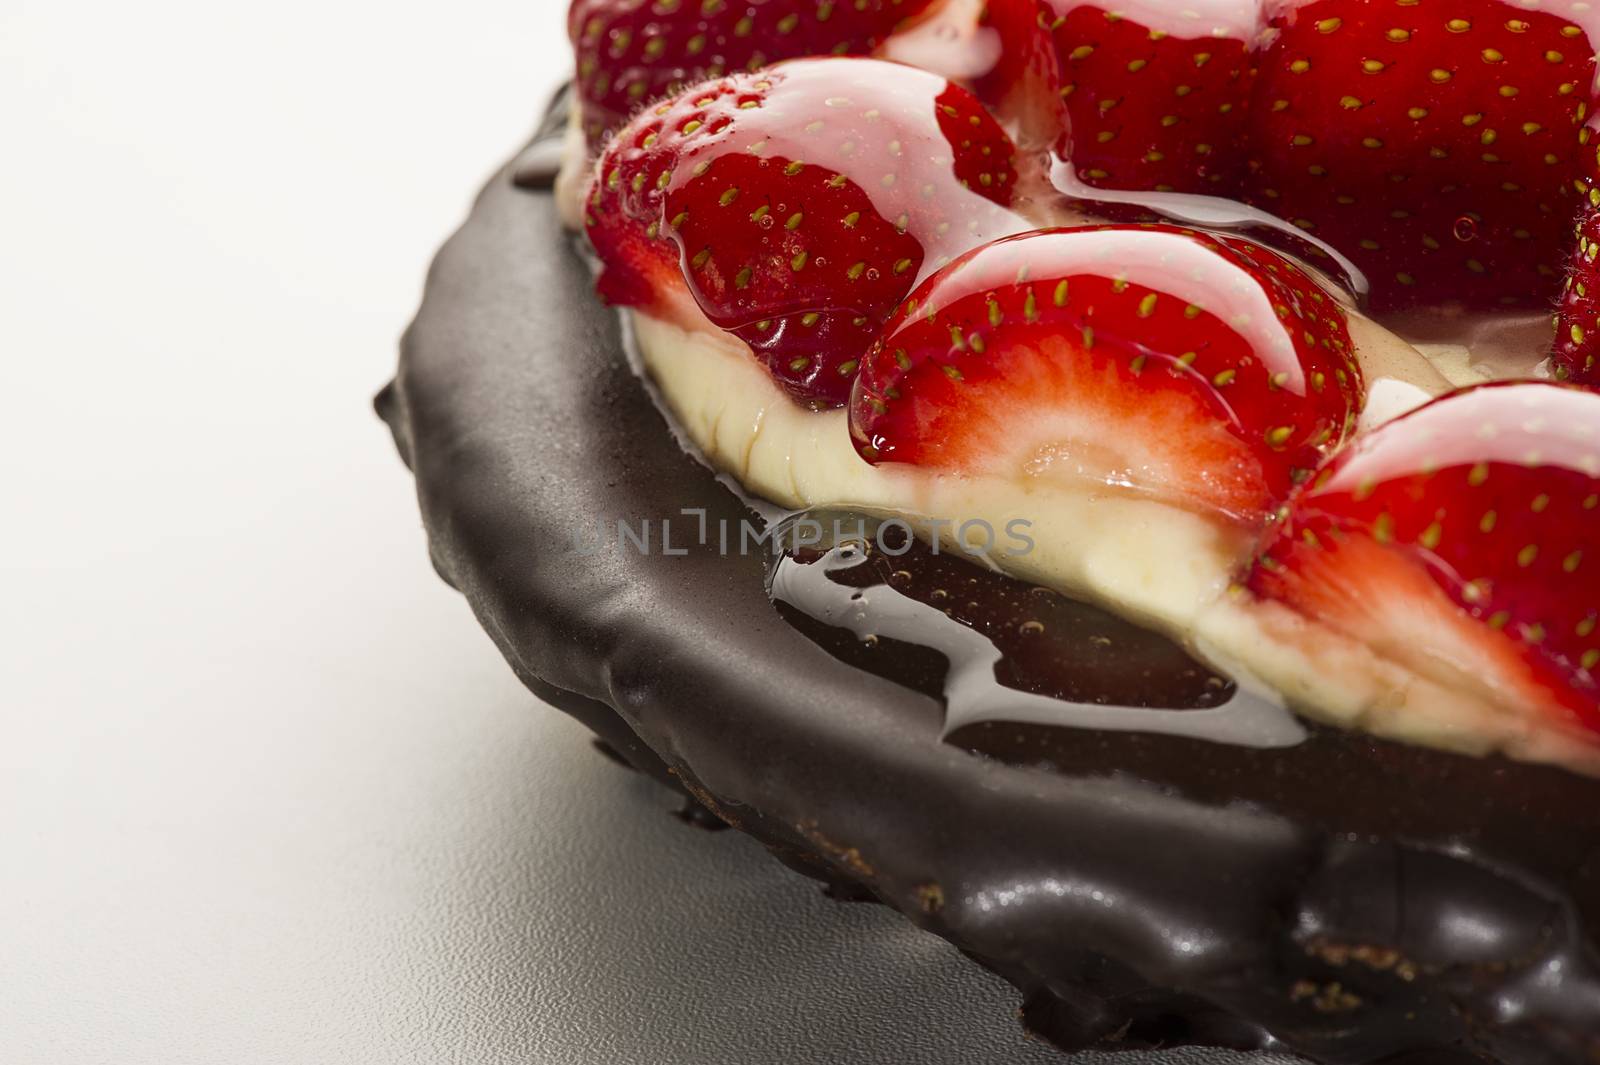 Closeup view of a freshly baked strawberry pie or tart with a topping of halved fresh ripe red berries glazed with syrup on a chocolate base, copyspace to the left